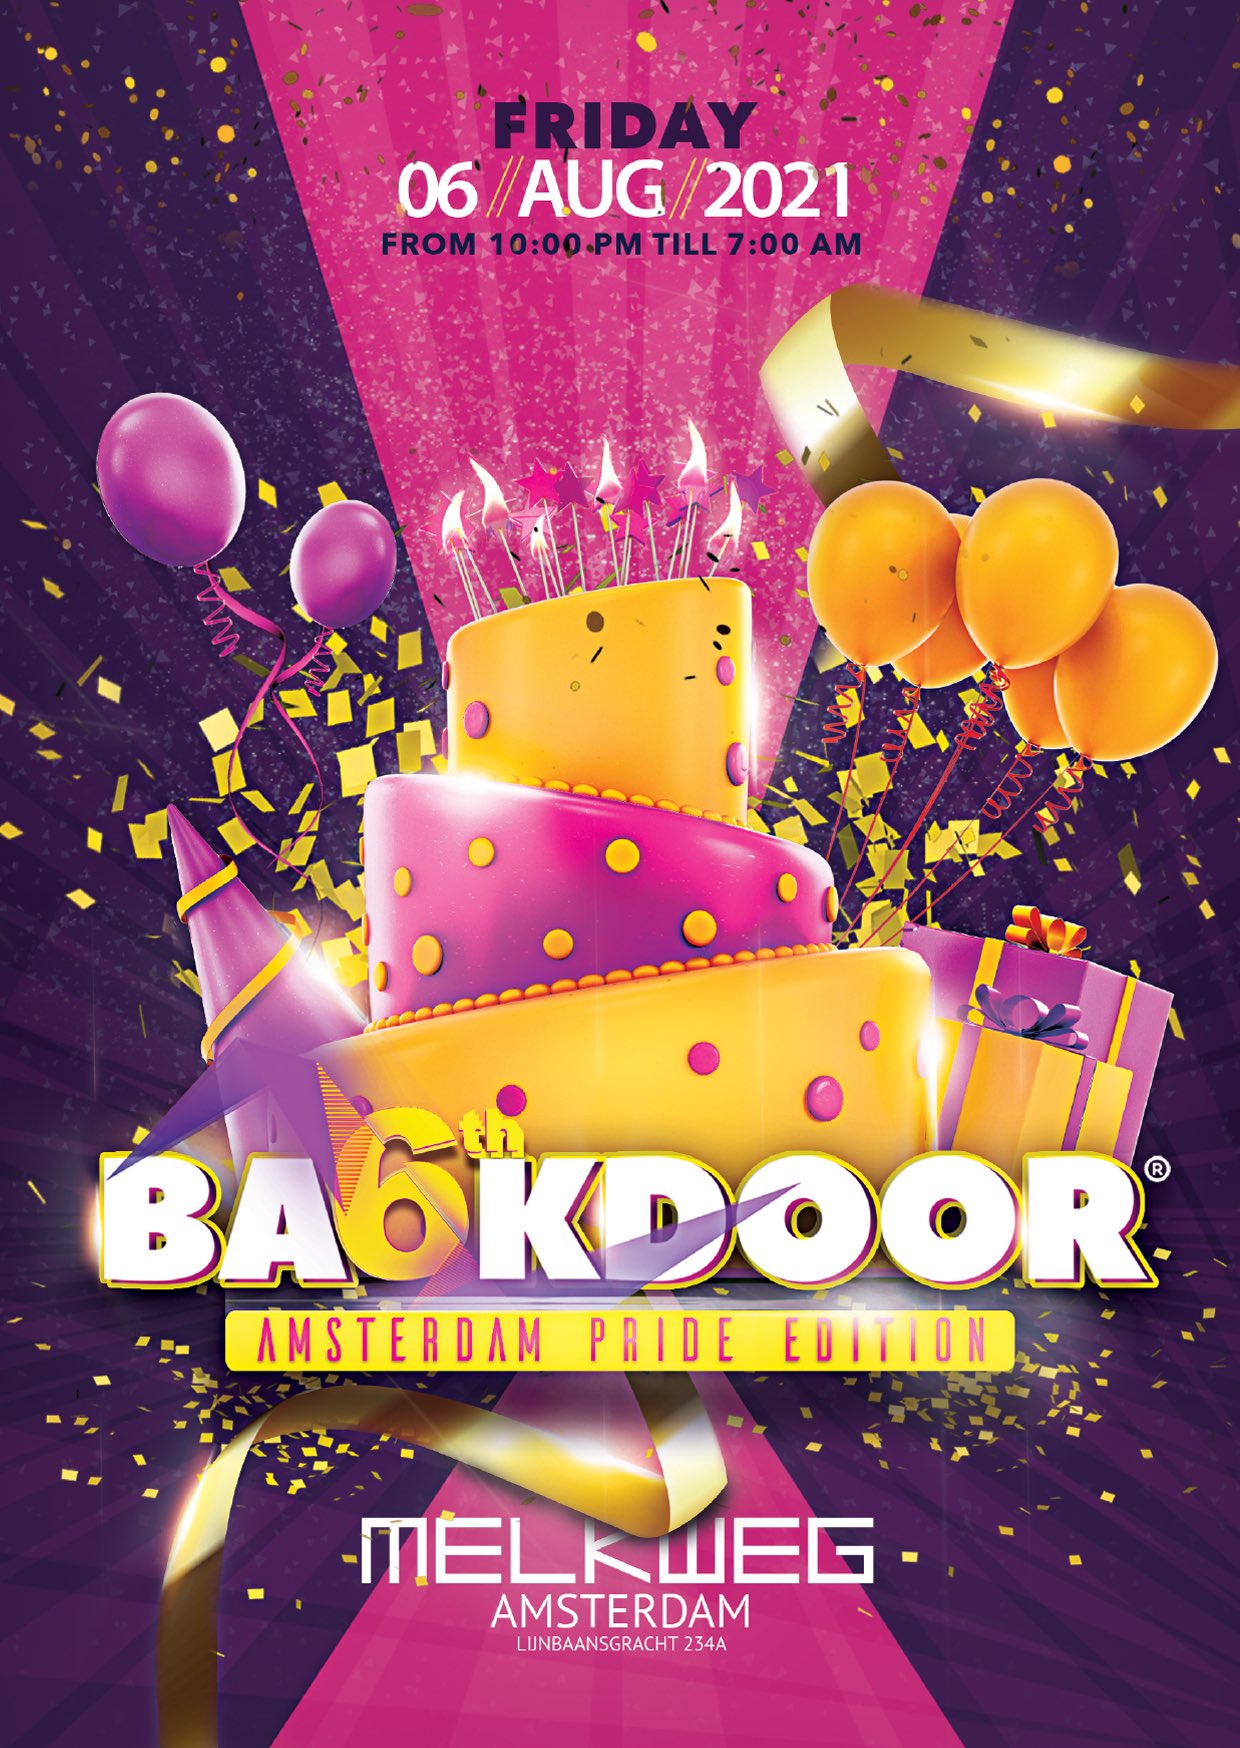 BACKDOOR Amsterdam – The best LGBT party in Amsterdam